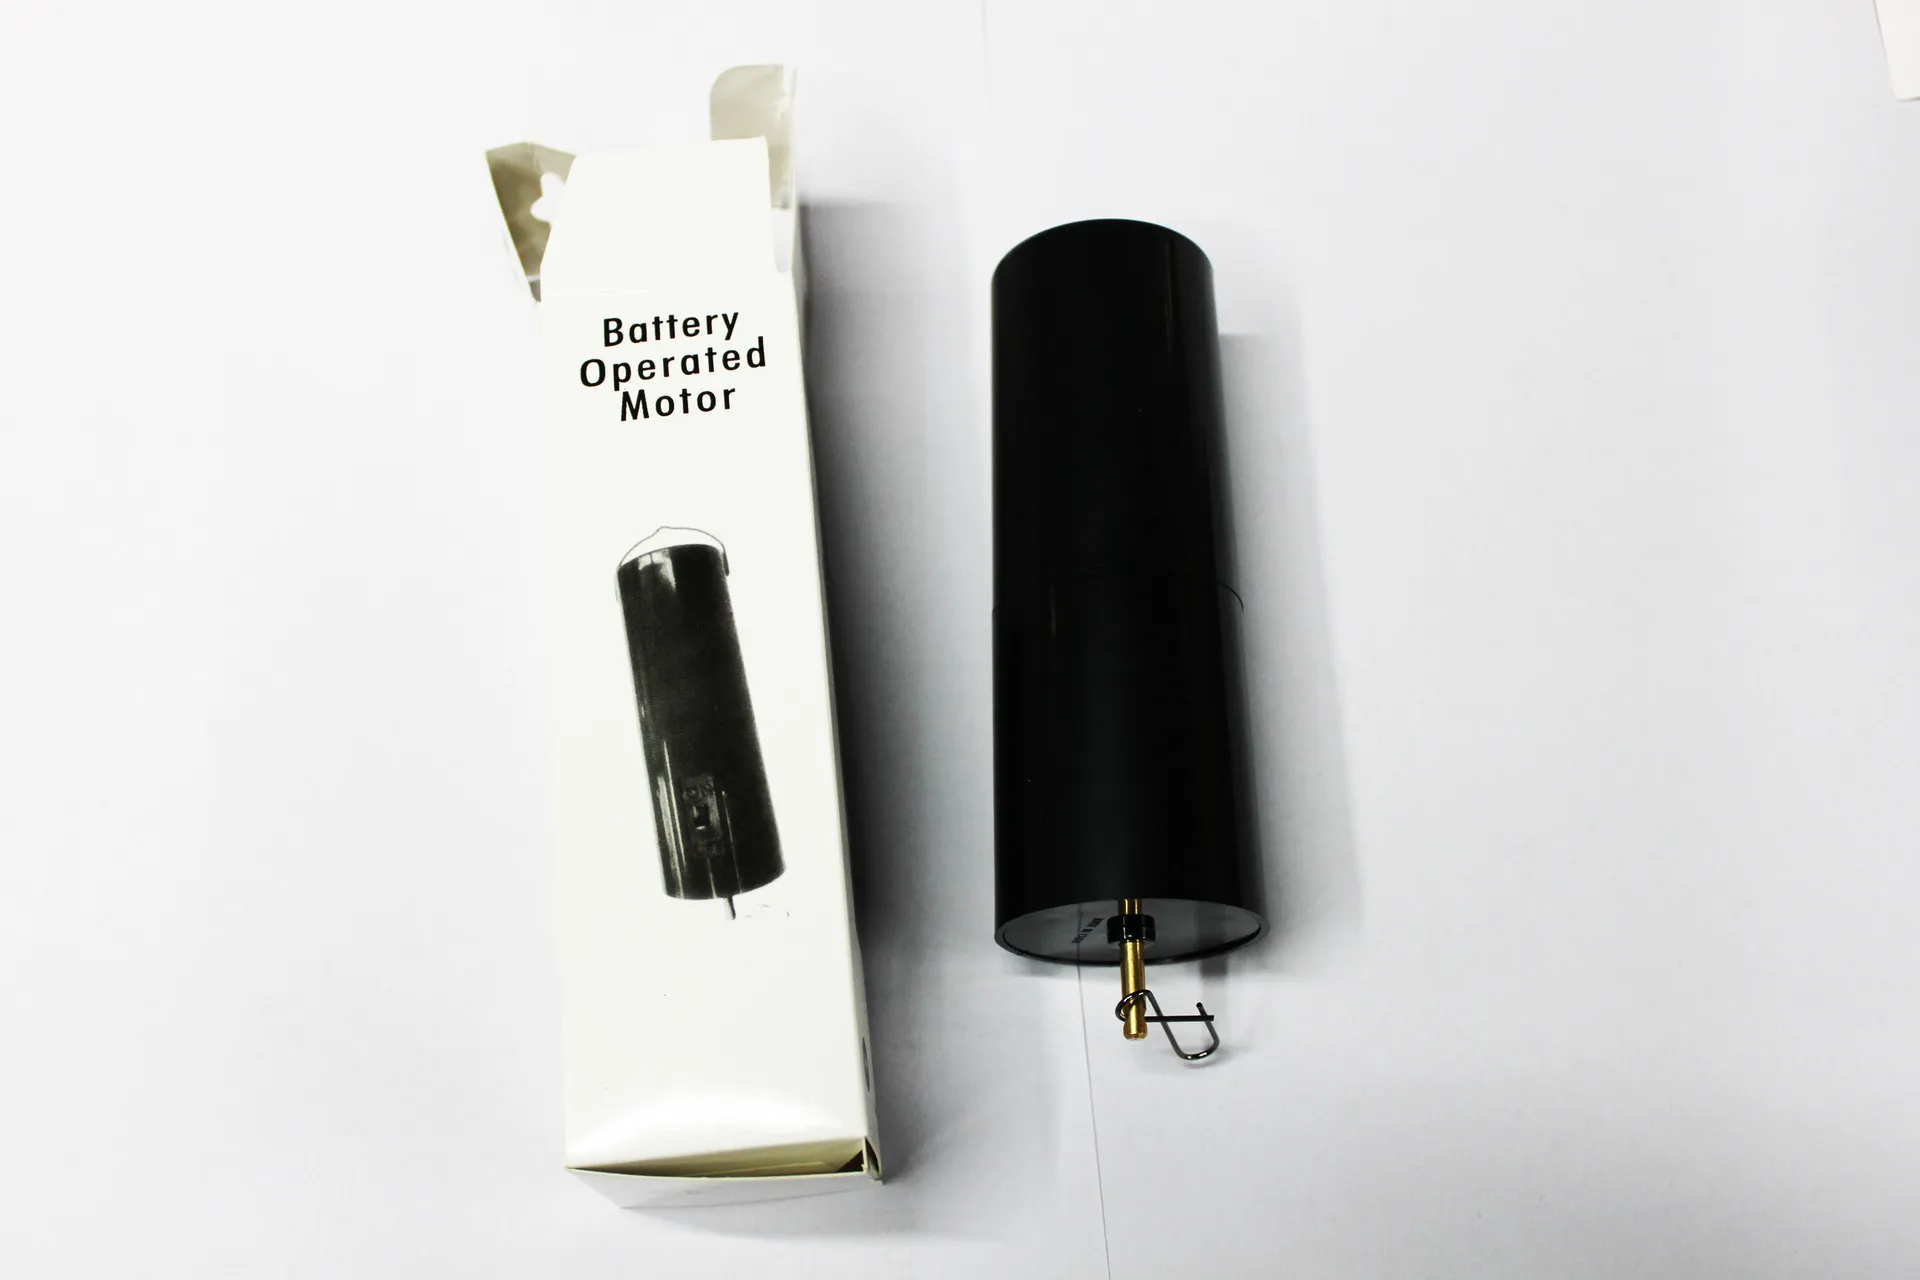 1.5V 30RPM Battery motor for wind spinner Hanging Display Rotating Motor - Battery Operated PLASTIC & METAL